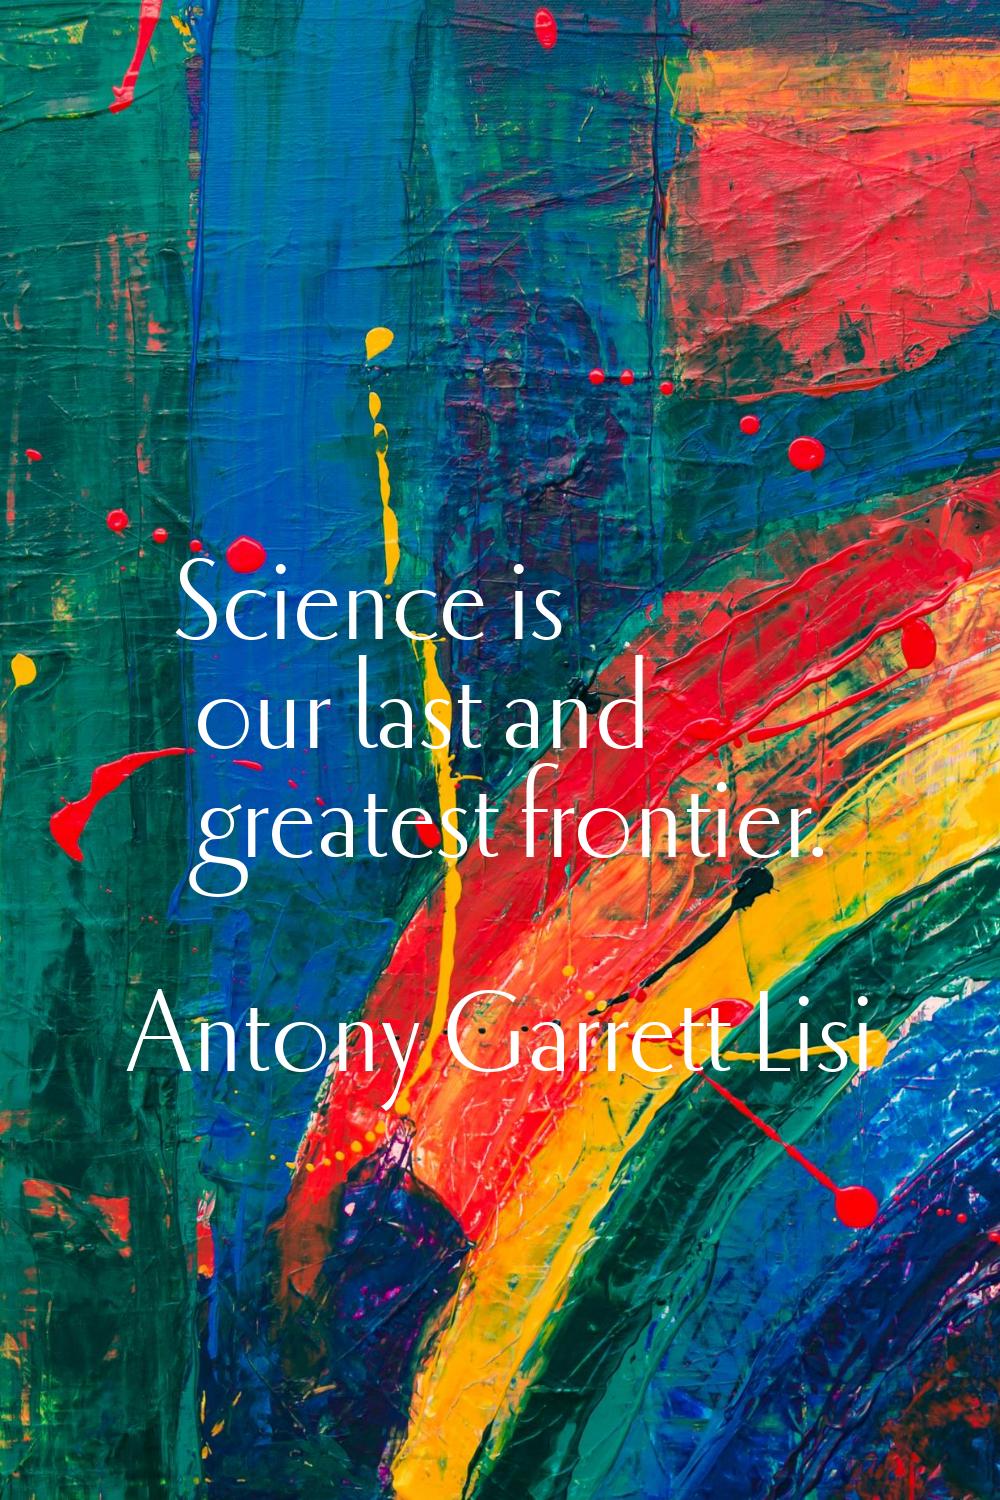 Science is our last and greatest frontier.